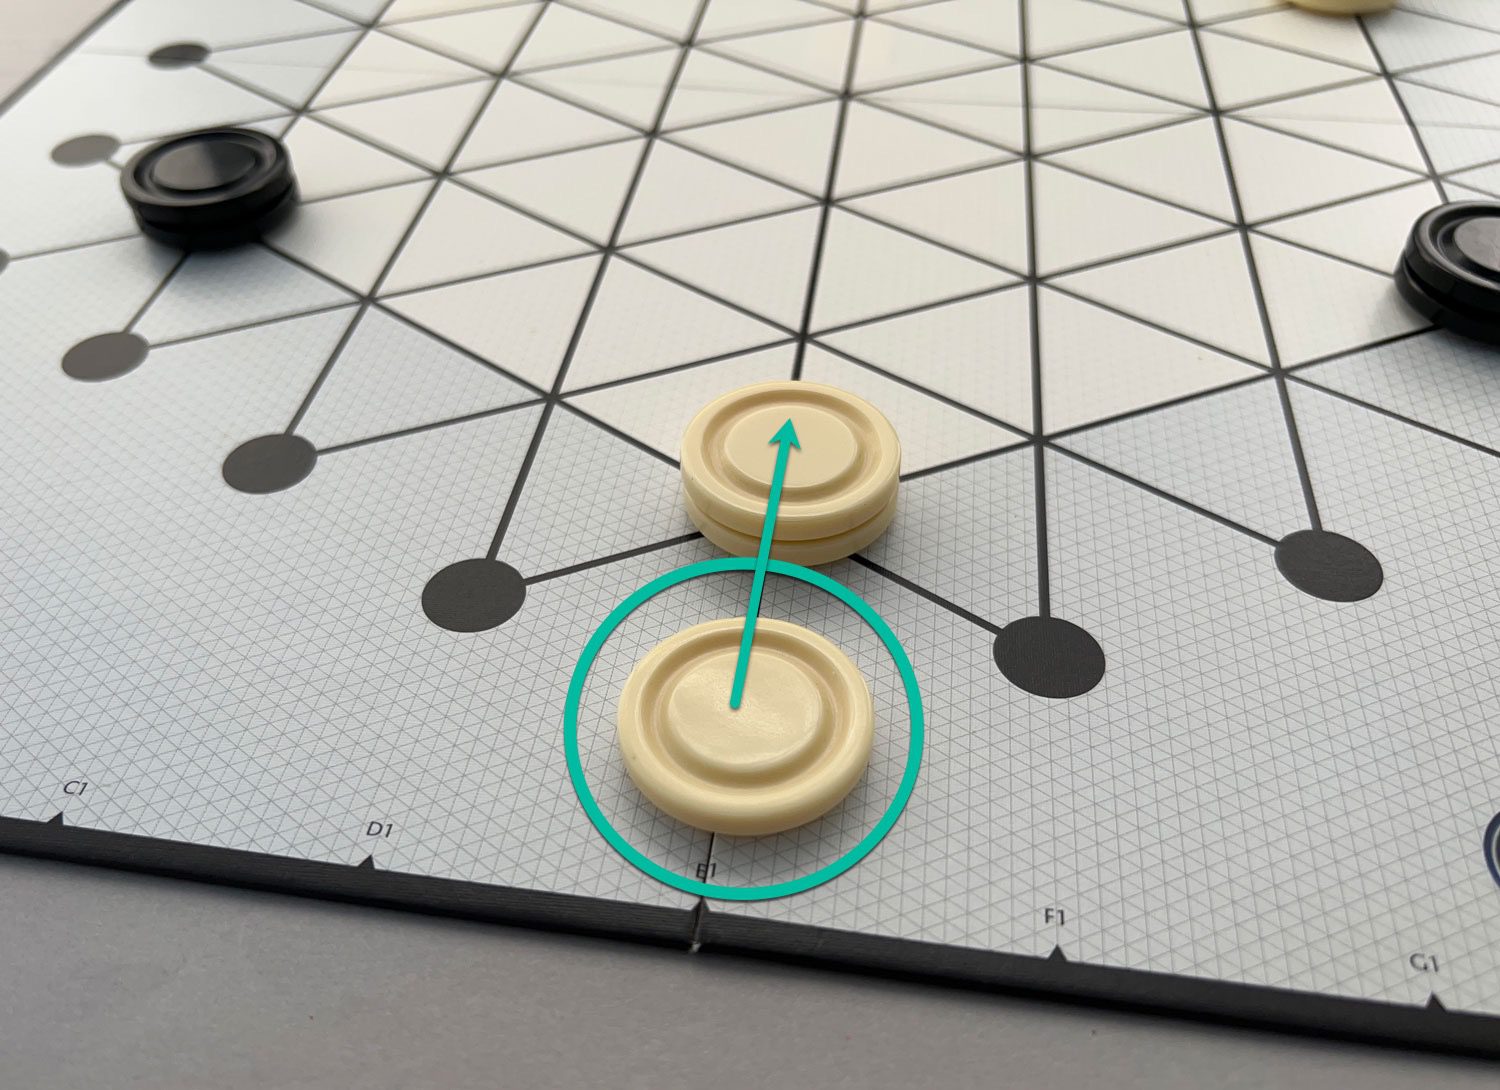 To push the white piece into the board, White places a piece on one of the connecting dots and pushes both pieces in a straight line